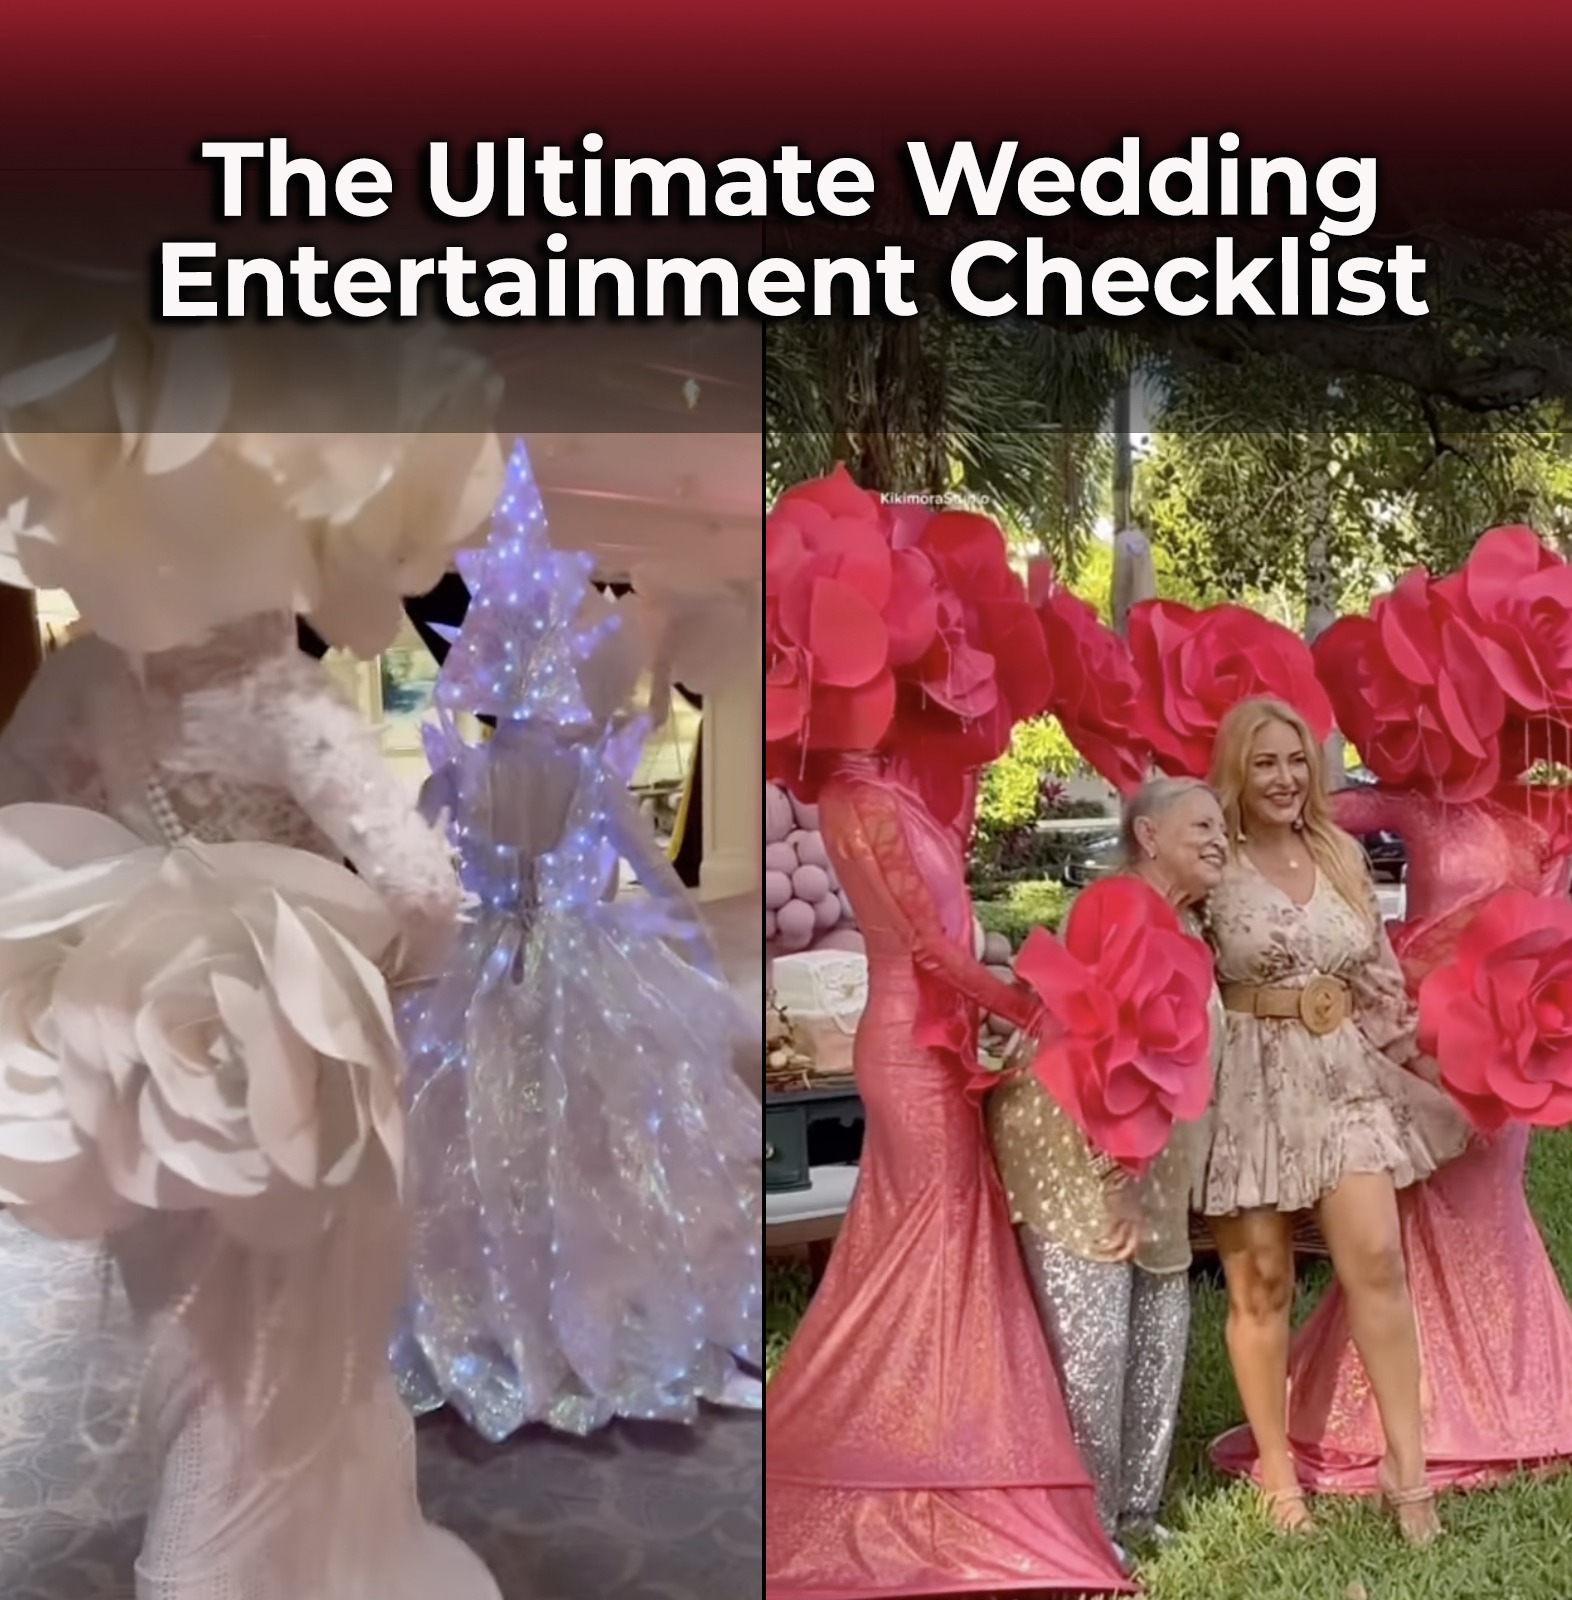 A Picture Of Roses Characters In Red, Cream, A Fantasy White Chracter With Led-lights, Guests And The Phrase The Ultimate Wedding Entertainment Checklist